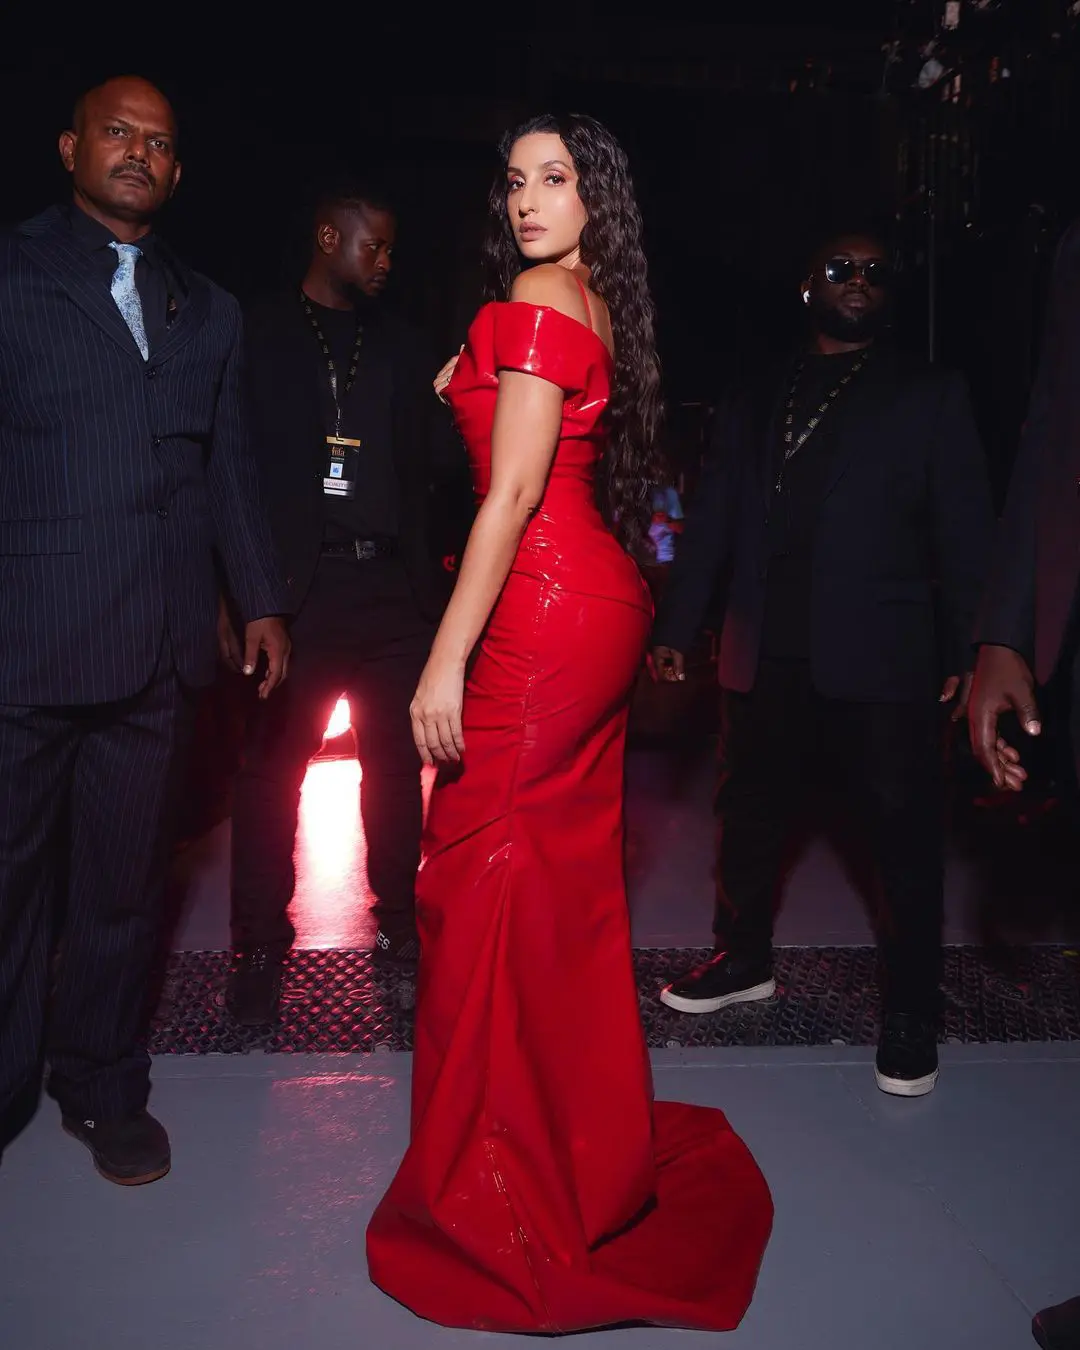 Nora Fatehi shines in Red Dress at IIFA Awards Event 